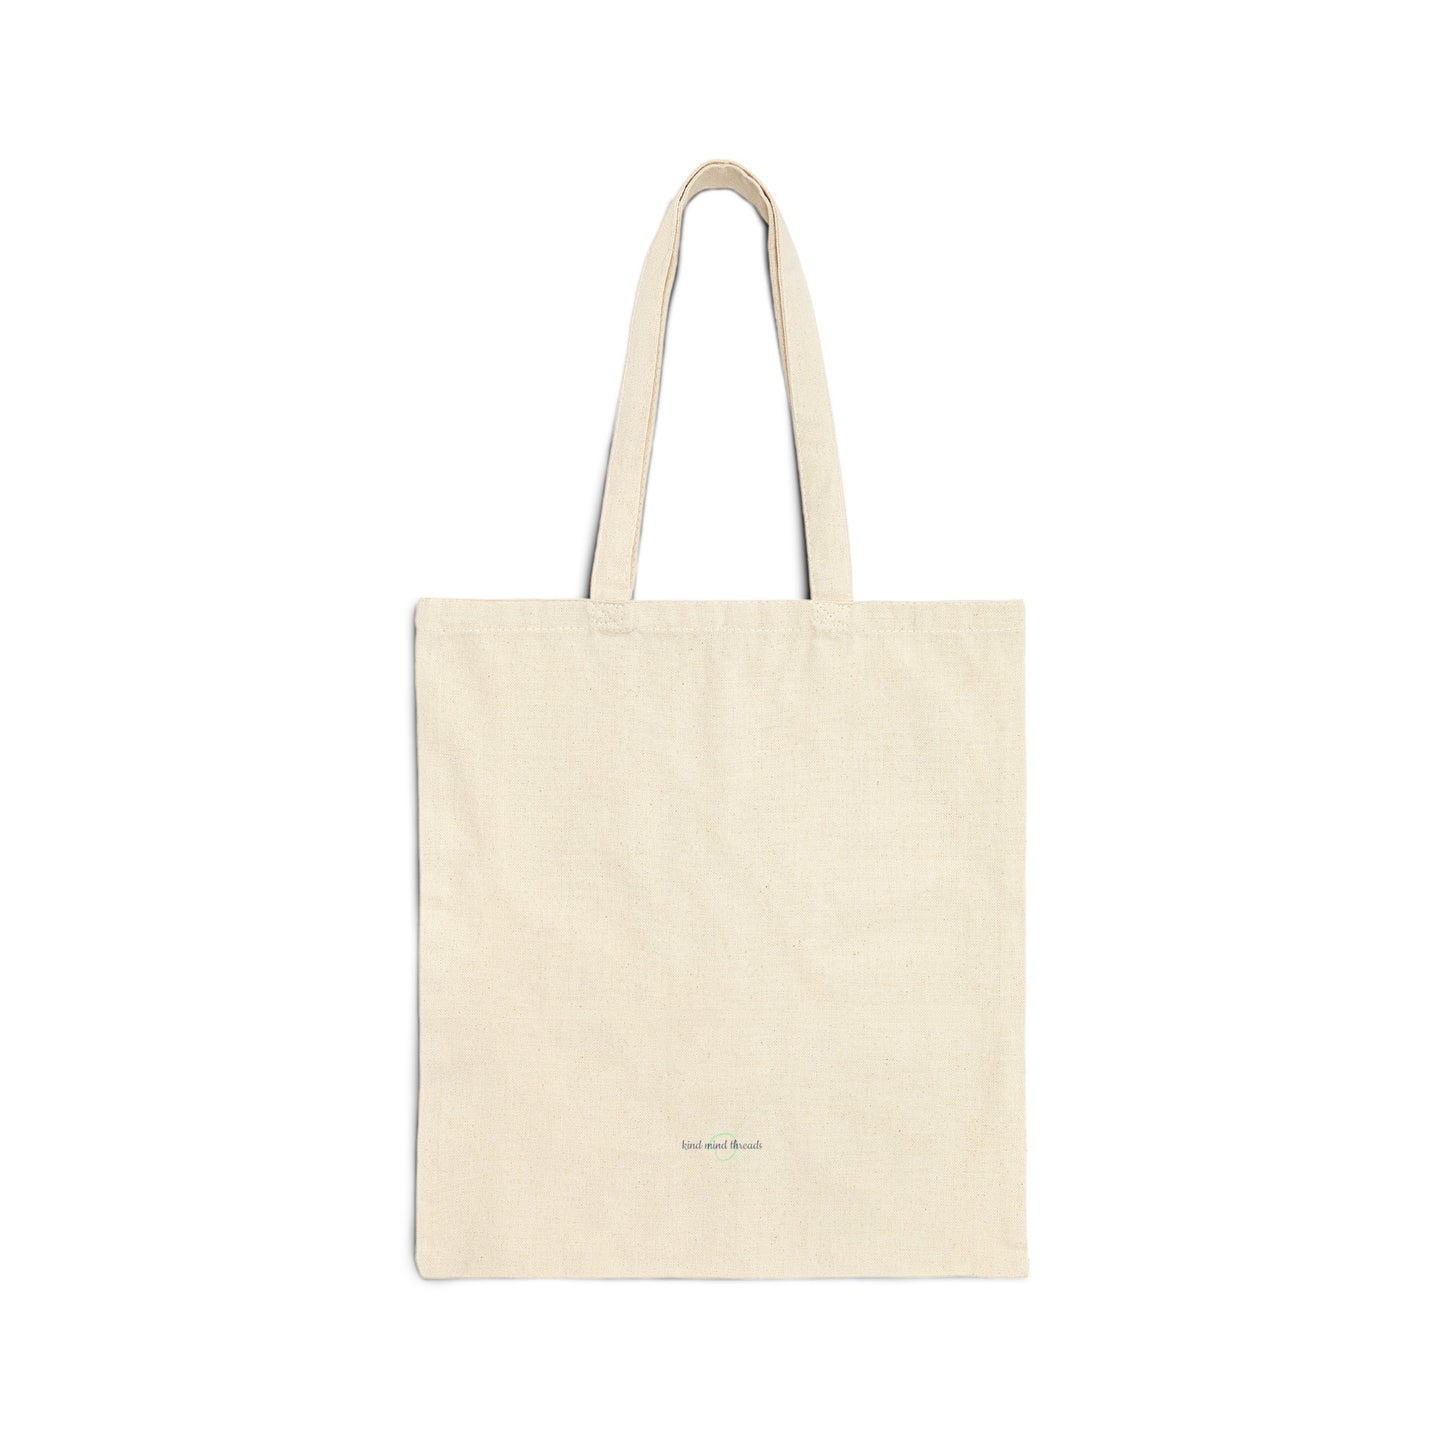 'Be Kind' Cotton Canvas Tote Bag